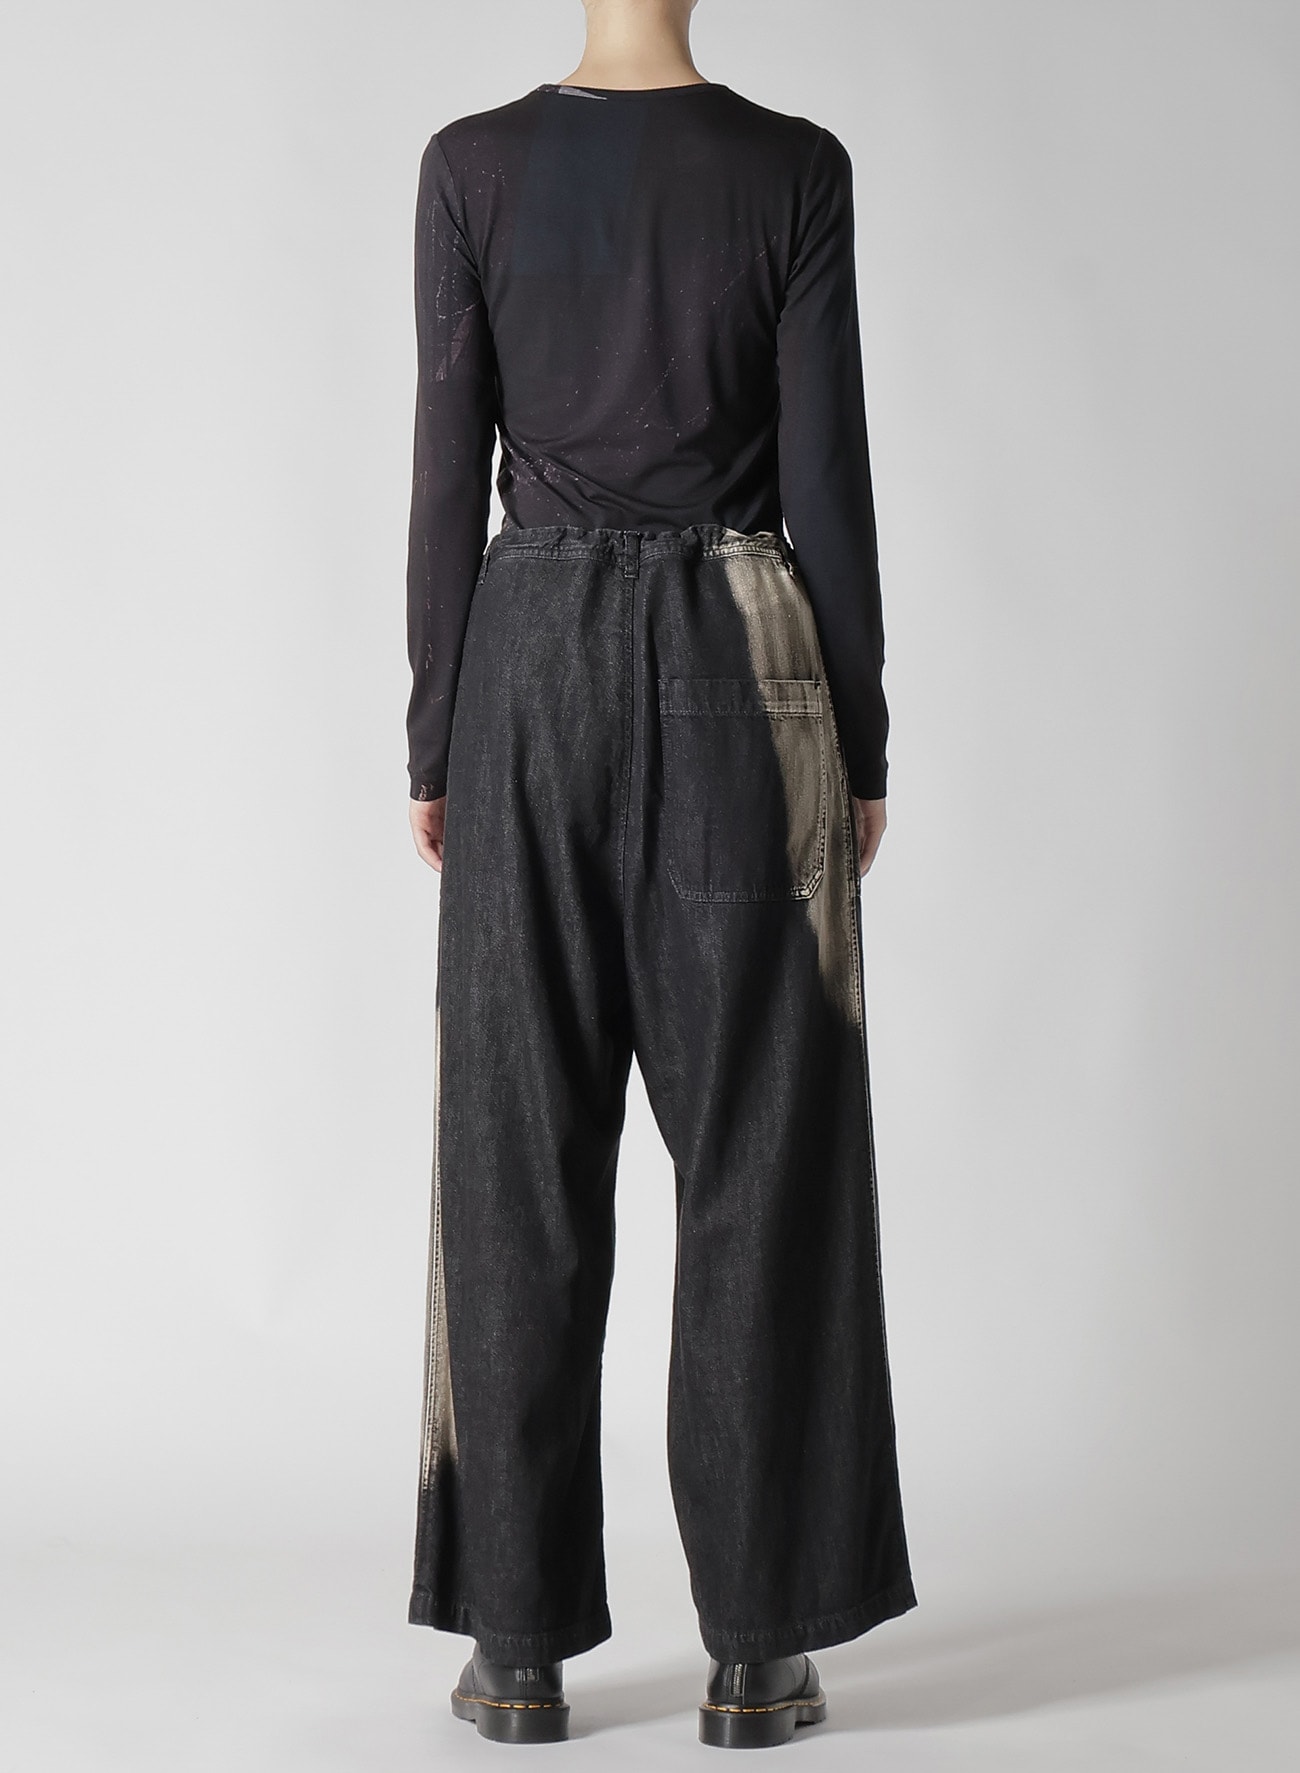 【8/2 12:00(JST) Release】C/ SPOTTED DENIM LONG STRAIGHT PANTS